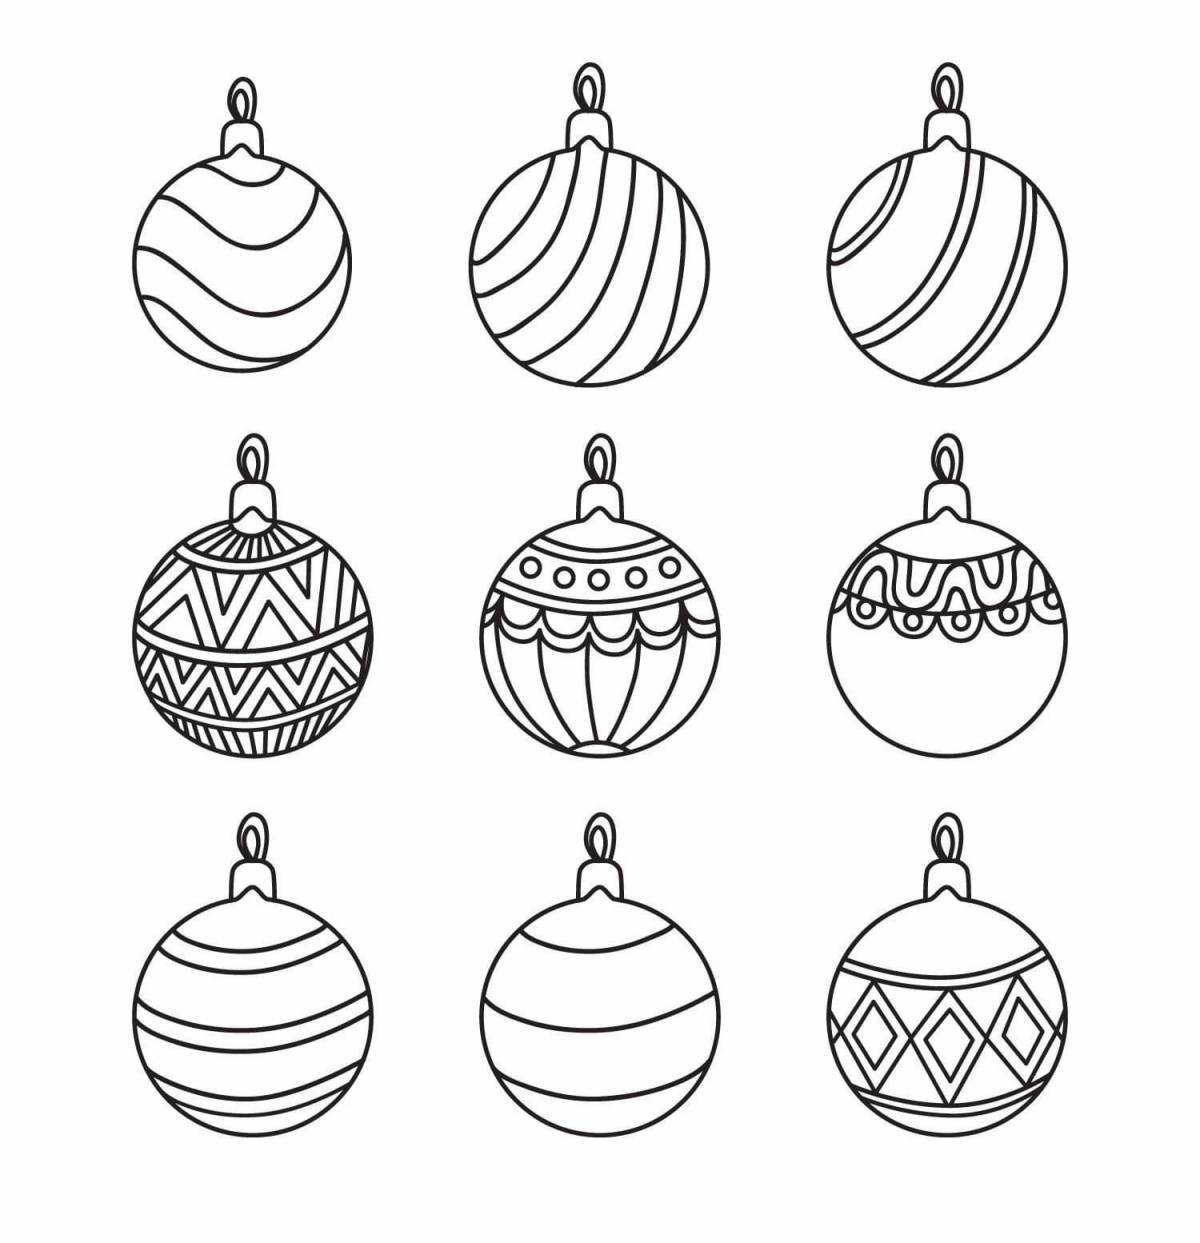 Adorable Christmas decorations coloring book